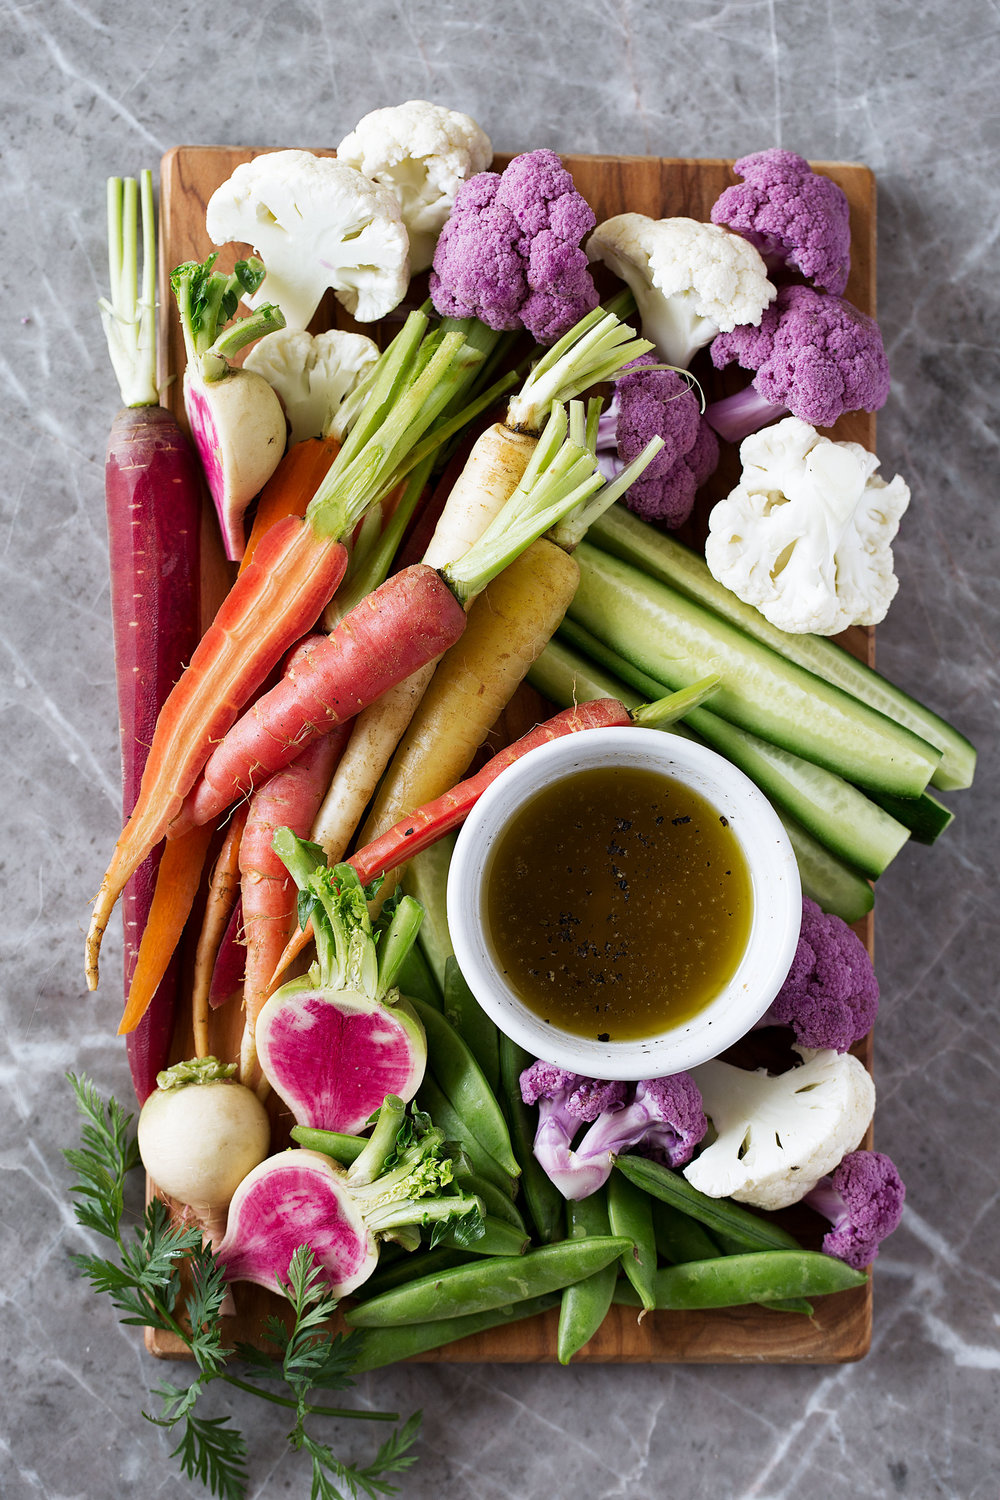 Bagna Cauda is a dish from the Piedmont region of Northwest Italy made with olive oil, garlic and anchovies and served with raw vegetables - cauliflower, carrots, cucumber and watermelon radish